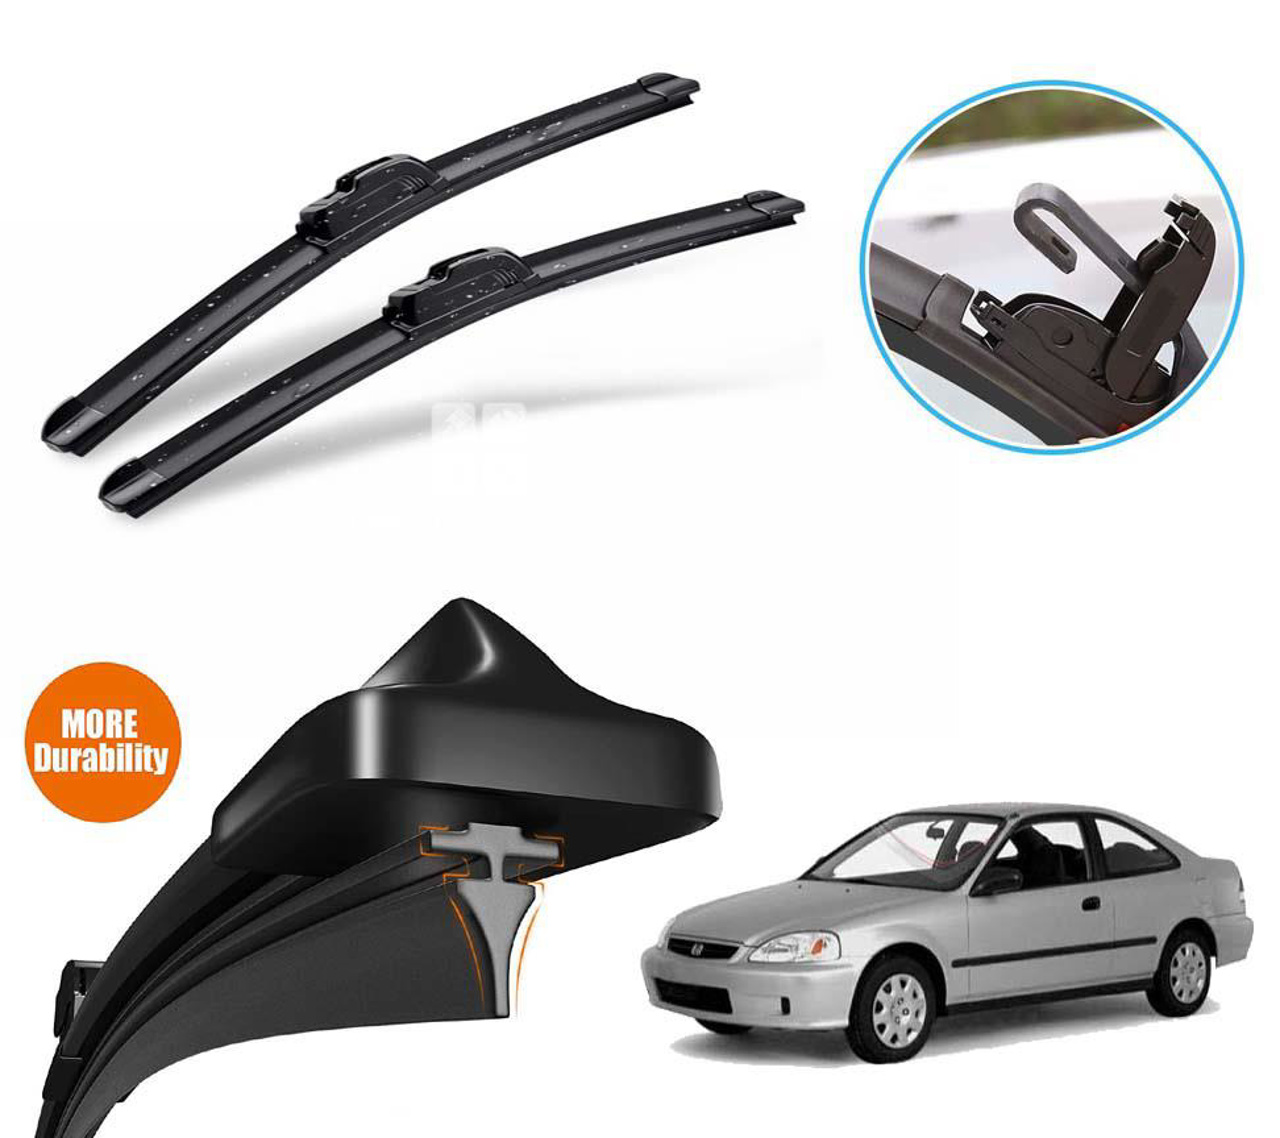 Picture of Honda Civic 1995 - 2002 Silicone Wiper Blades | Soft Rubber Vipers | High Quality Graphite Coated Rubber | Non Cracking Material